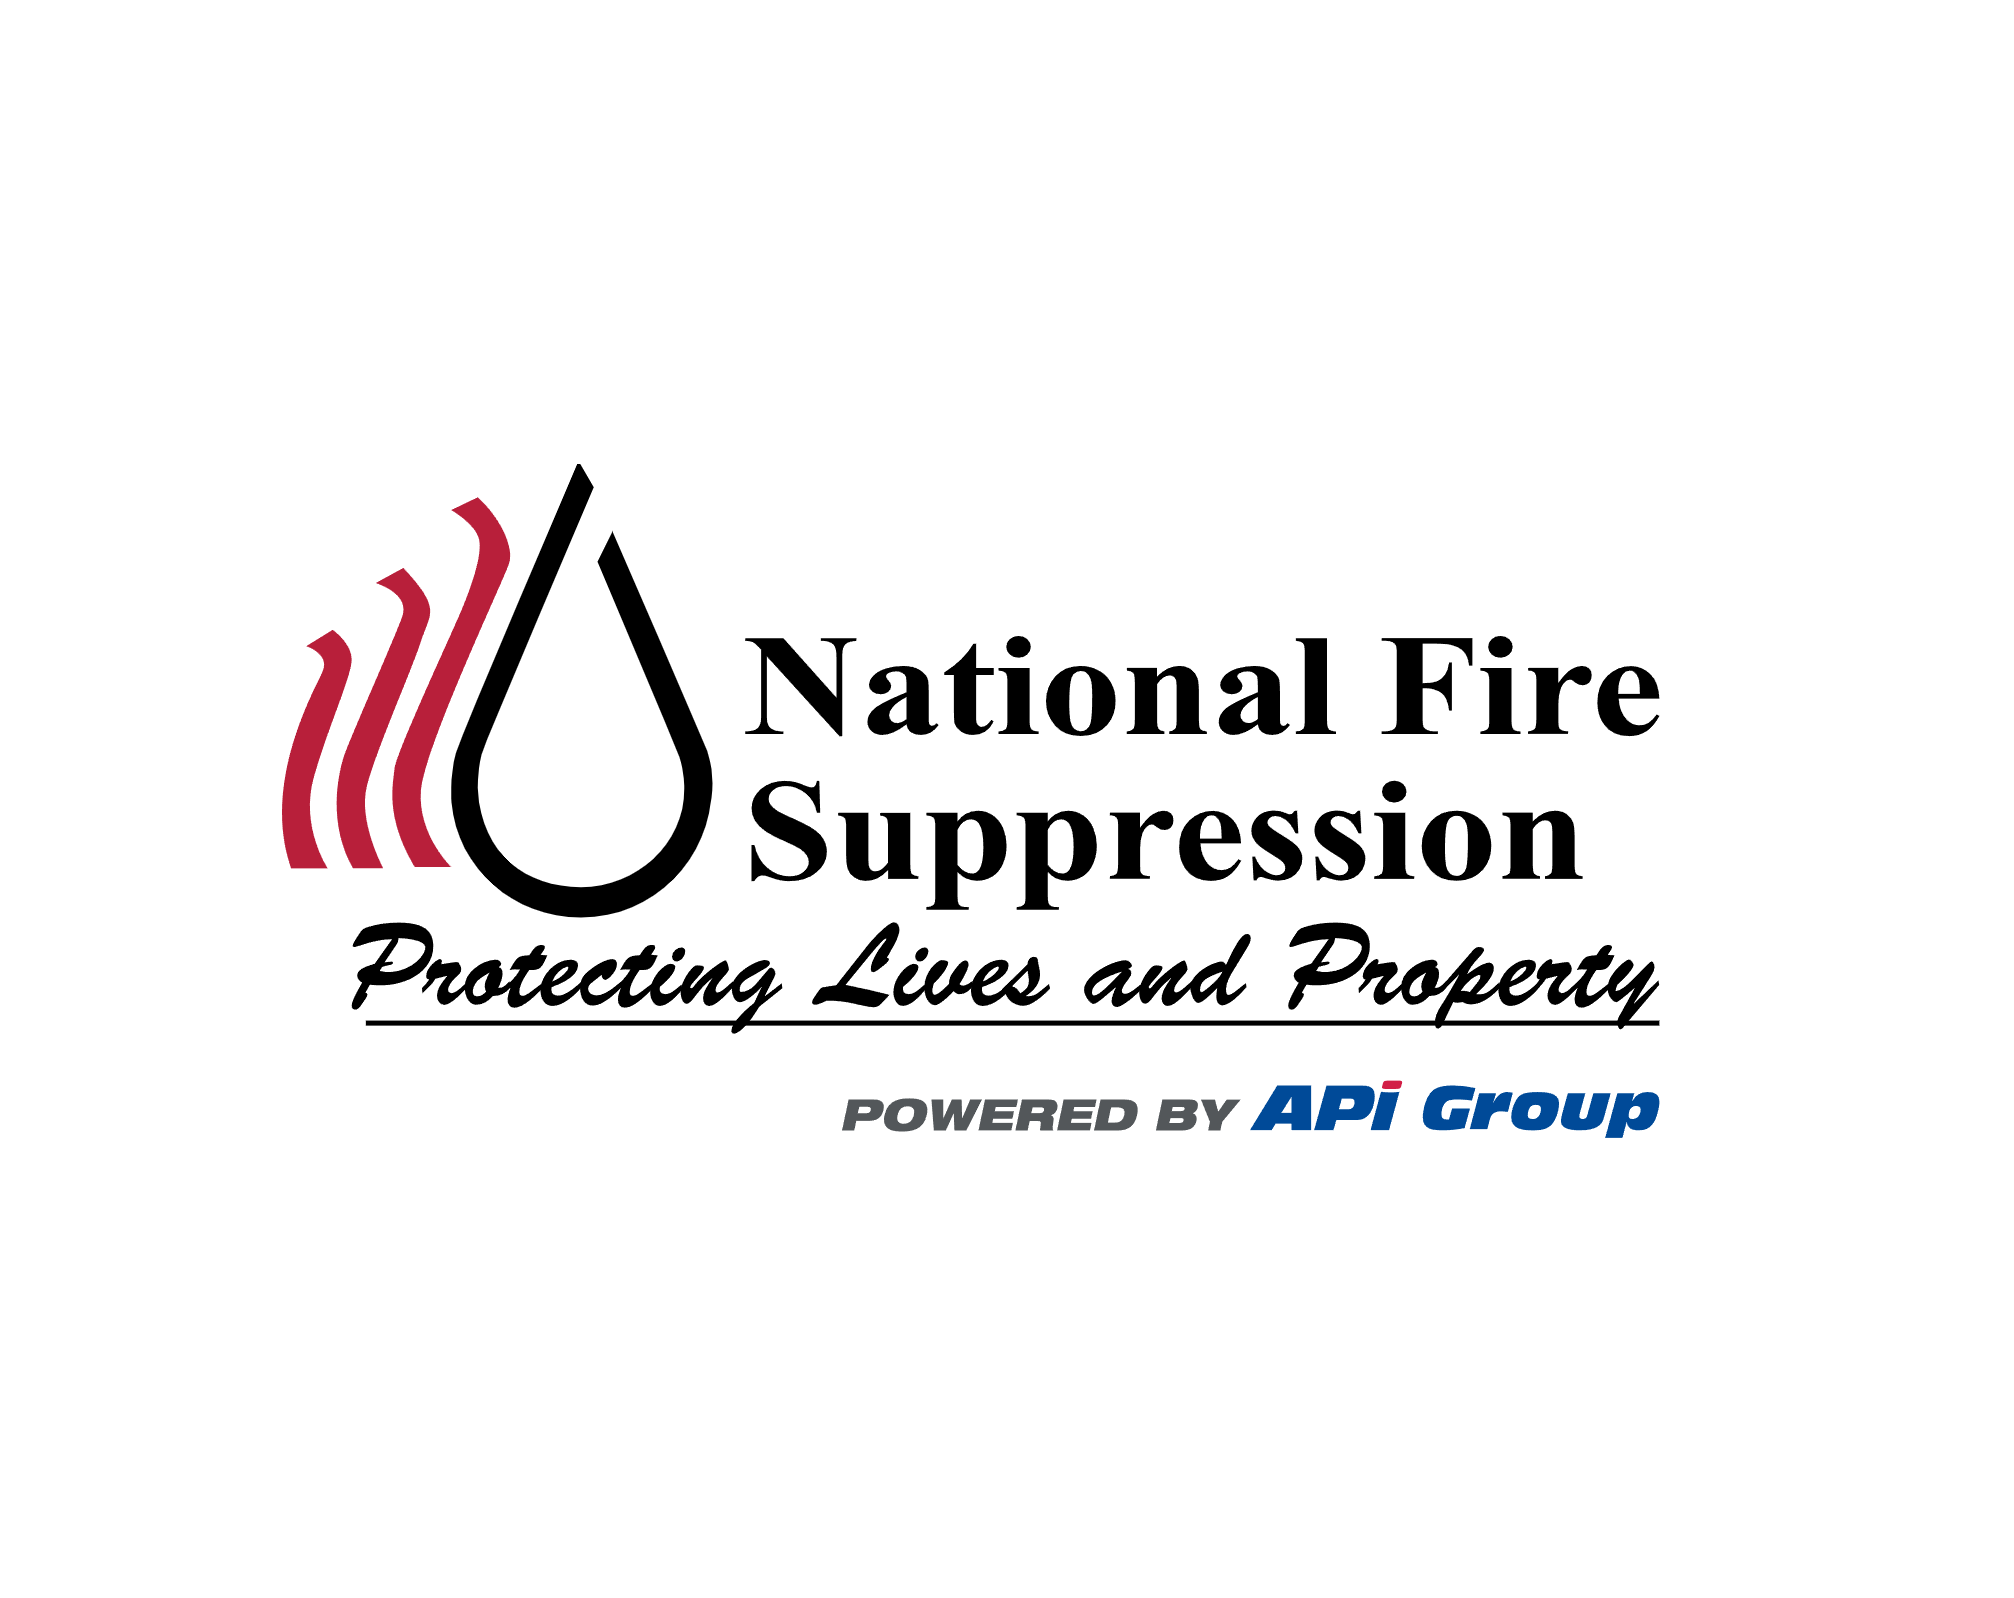 National Fire Suppression